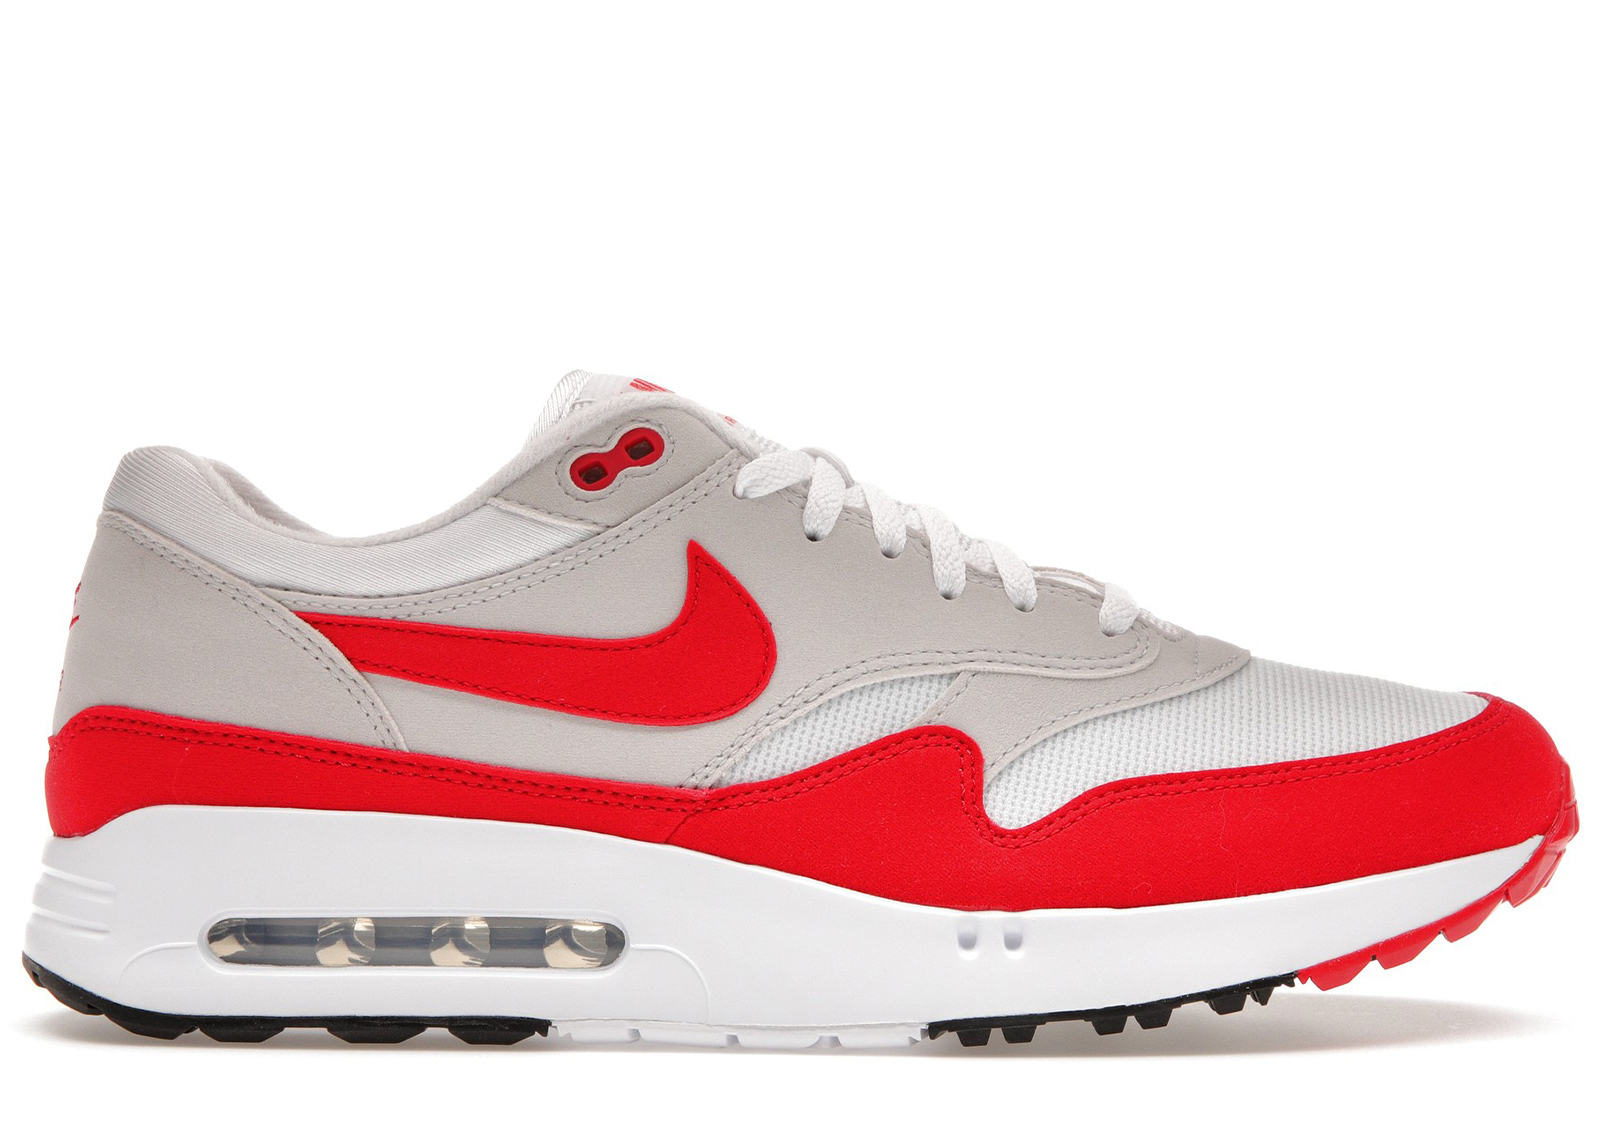 Nike Air Max 1 '86 OG Big Bubble Sport Red Men's - DQ3989-100 - US